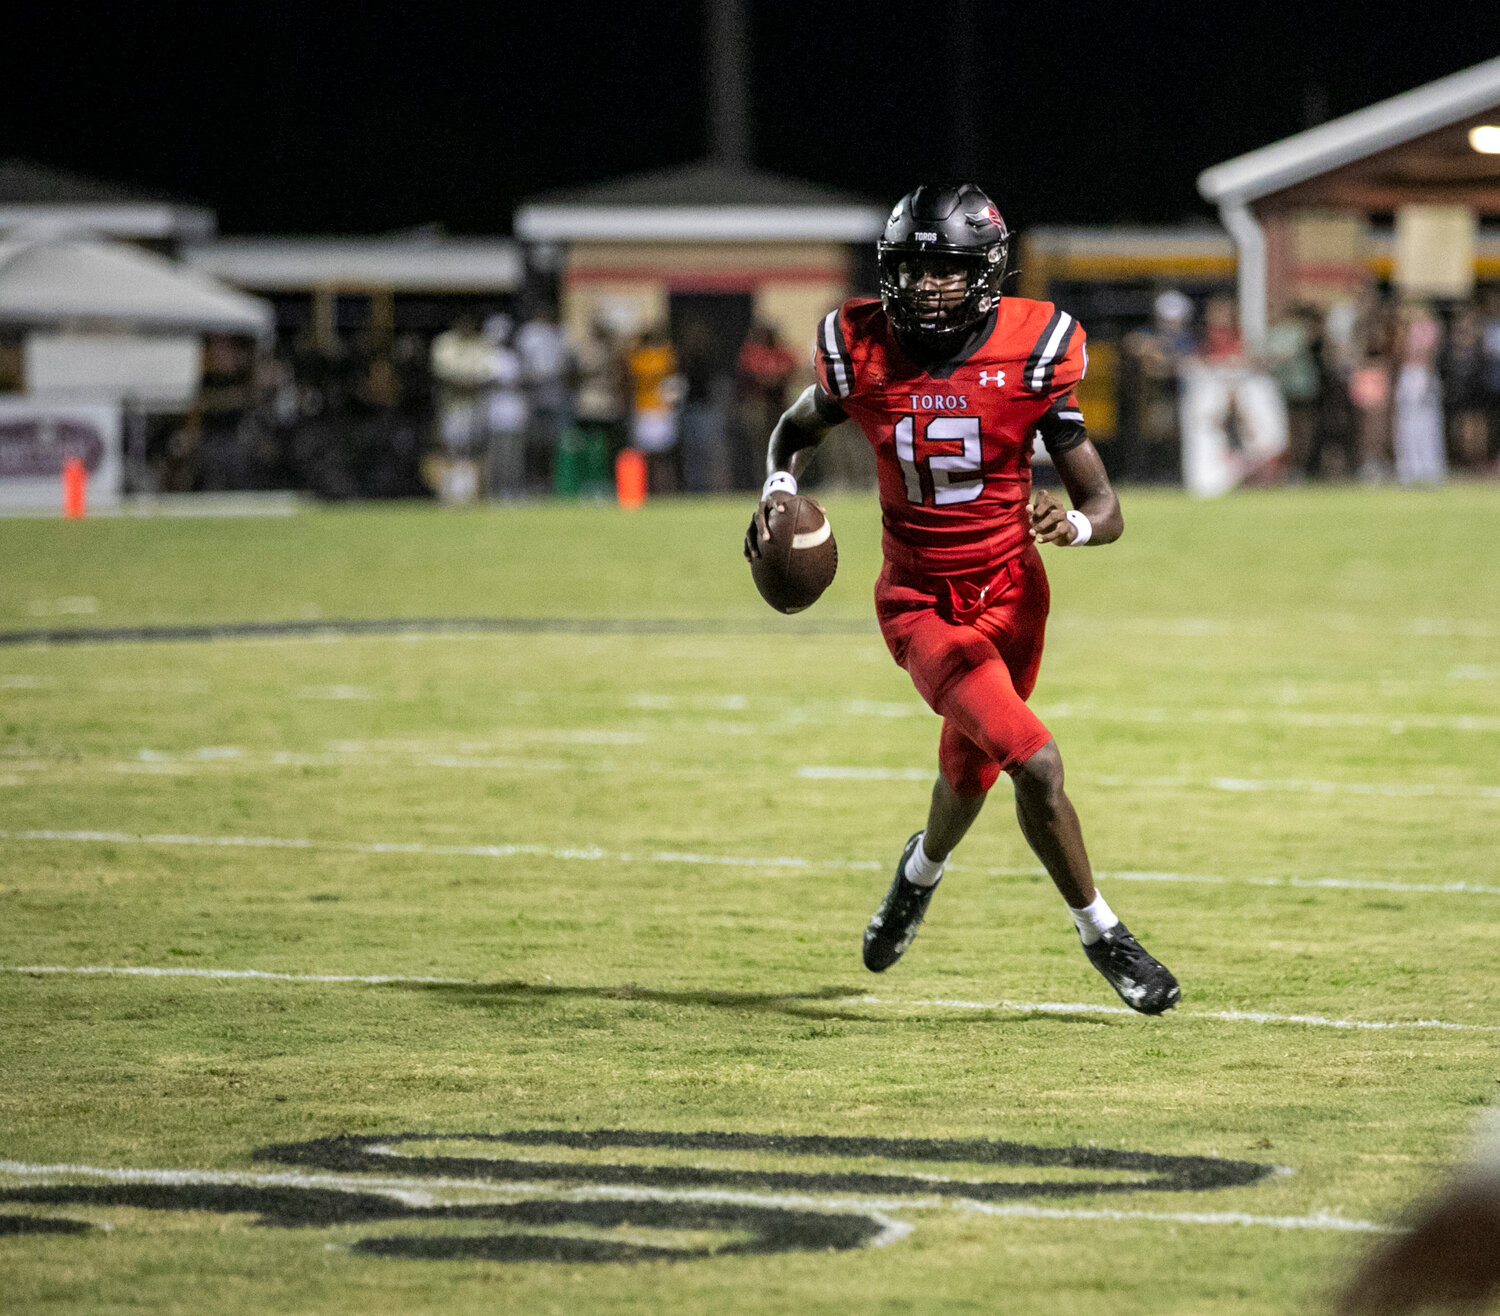 Spanish Fort quarterback Aaden Shamburger scrambles near the sideline during his first start as a Toro on Thursday, Aug. 24, at home against the Fairhope Pirates. Shamburger collected his first touchdown for Spanish Fort in the first quarter of the regular-season opener.